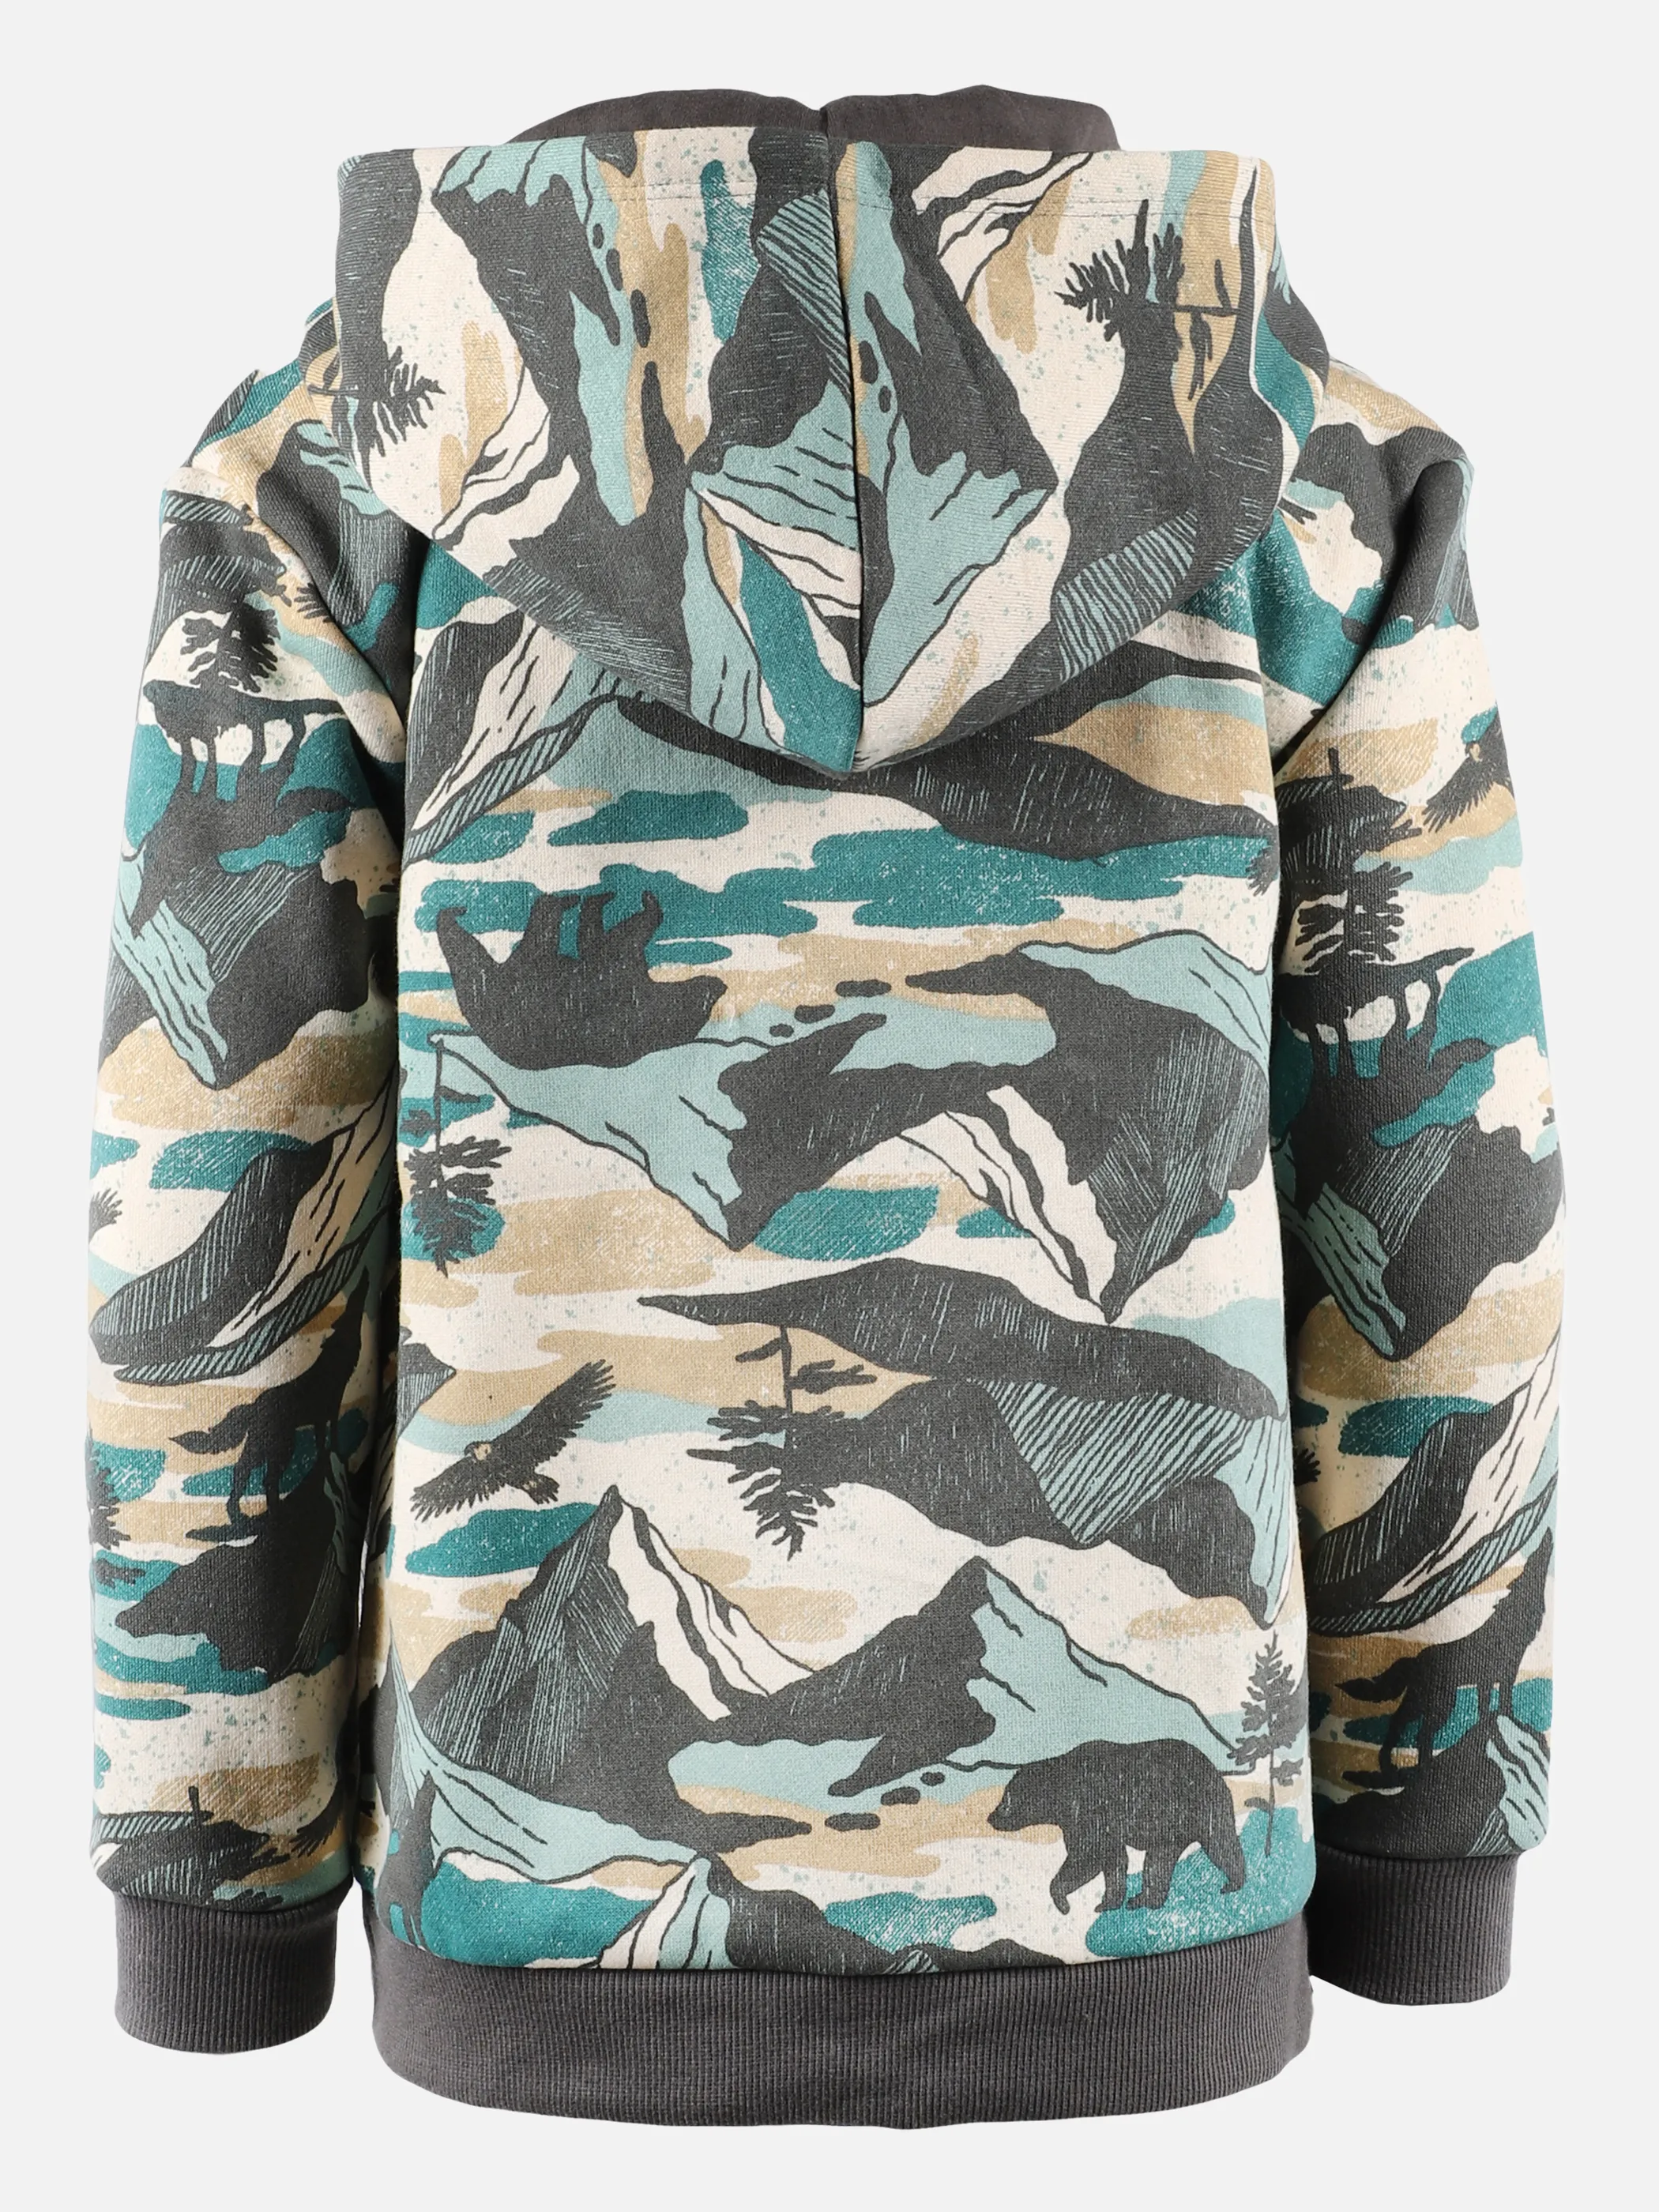 Stop + Go MB Hoodie in oliv Camouflage Grün 868308 OLIV 2